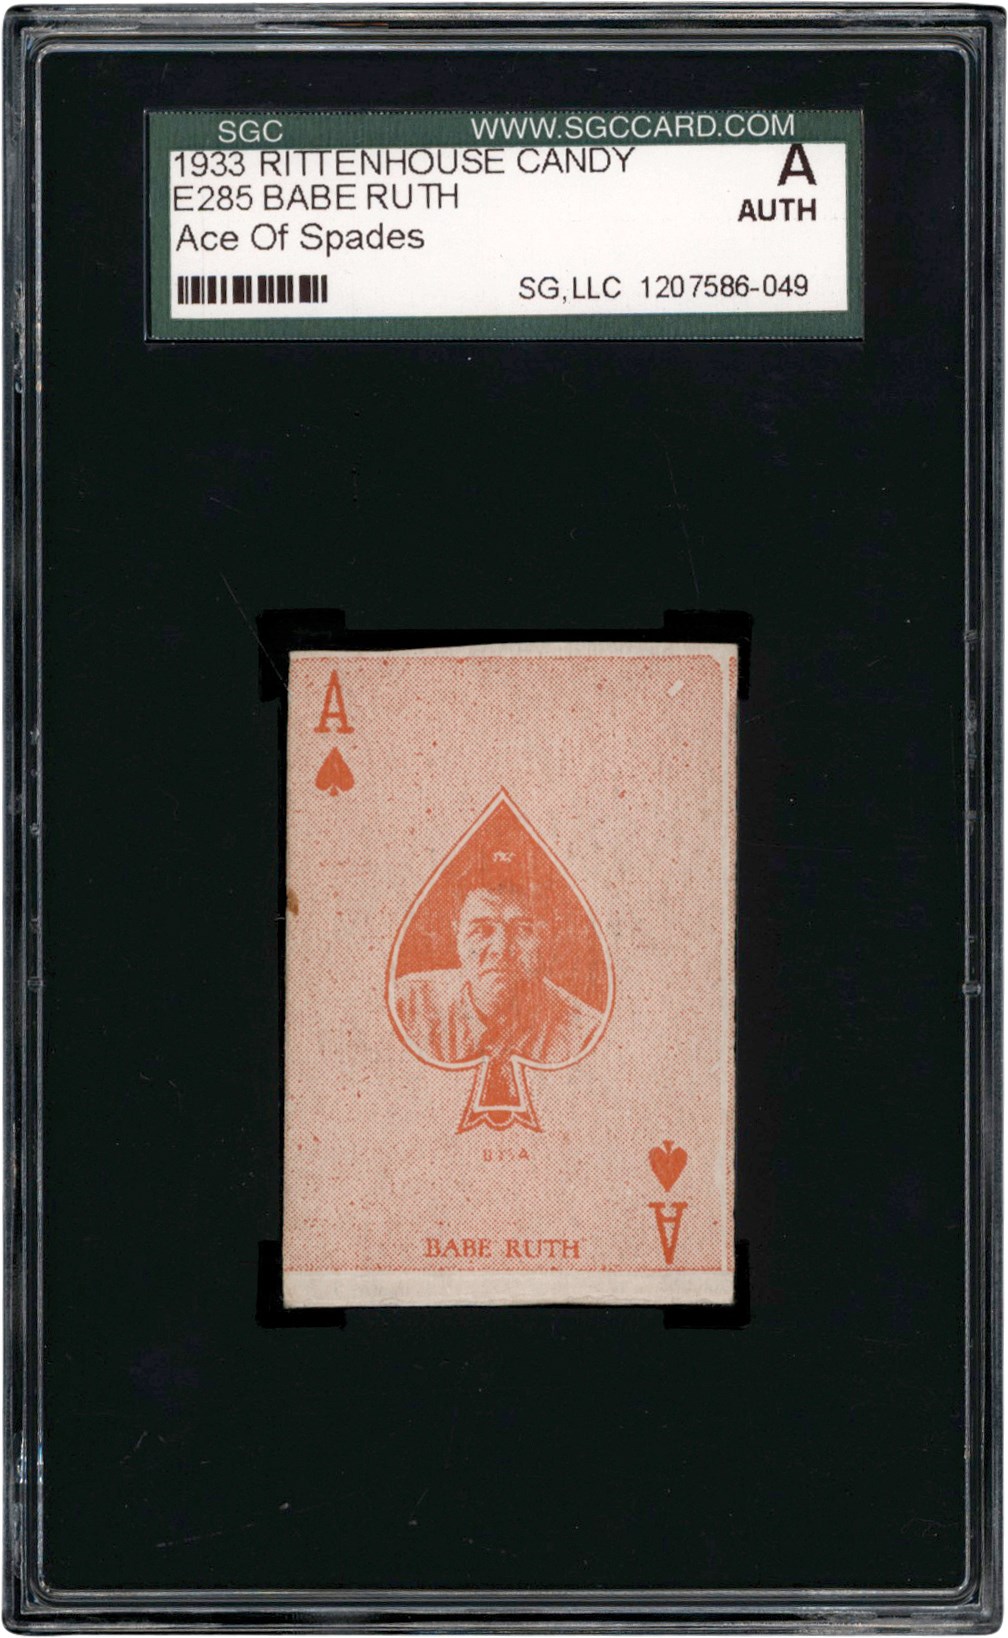 - 933 Rittenhouse Candy Babe Ruth (Ace of Spades) SGC Authentic